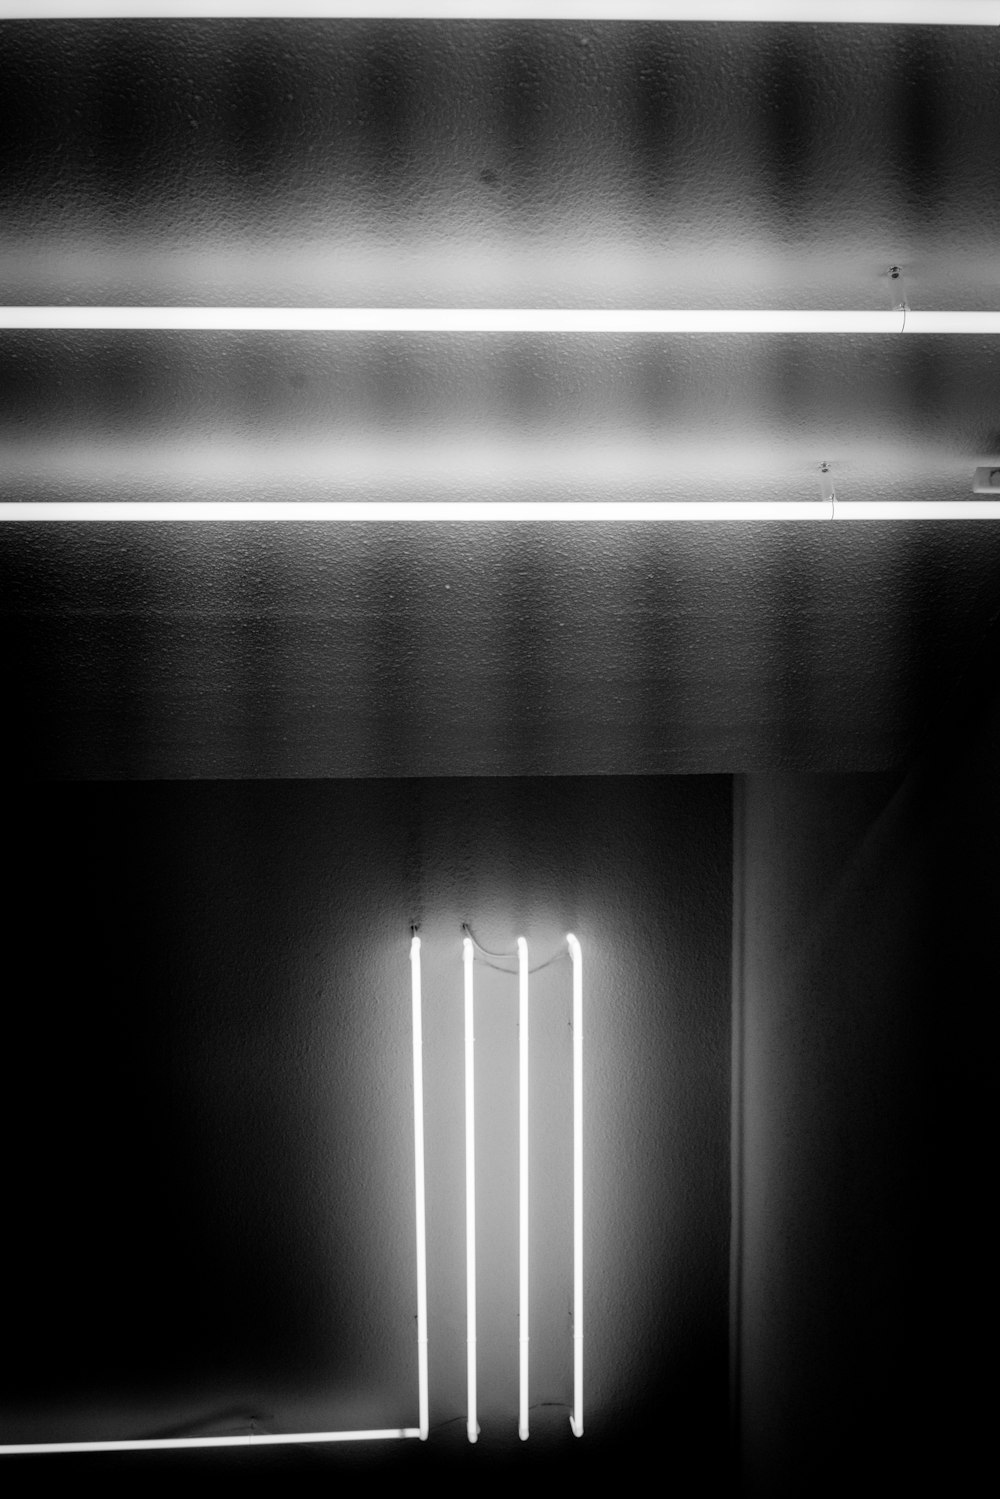 greyscale photography of lighted fluorescent lamps inside room